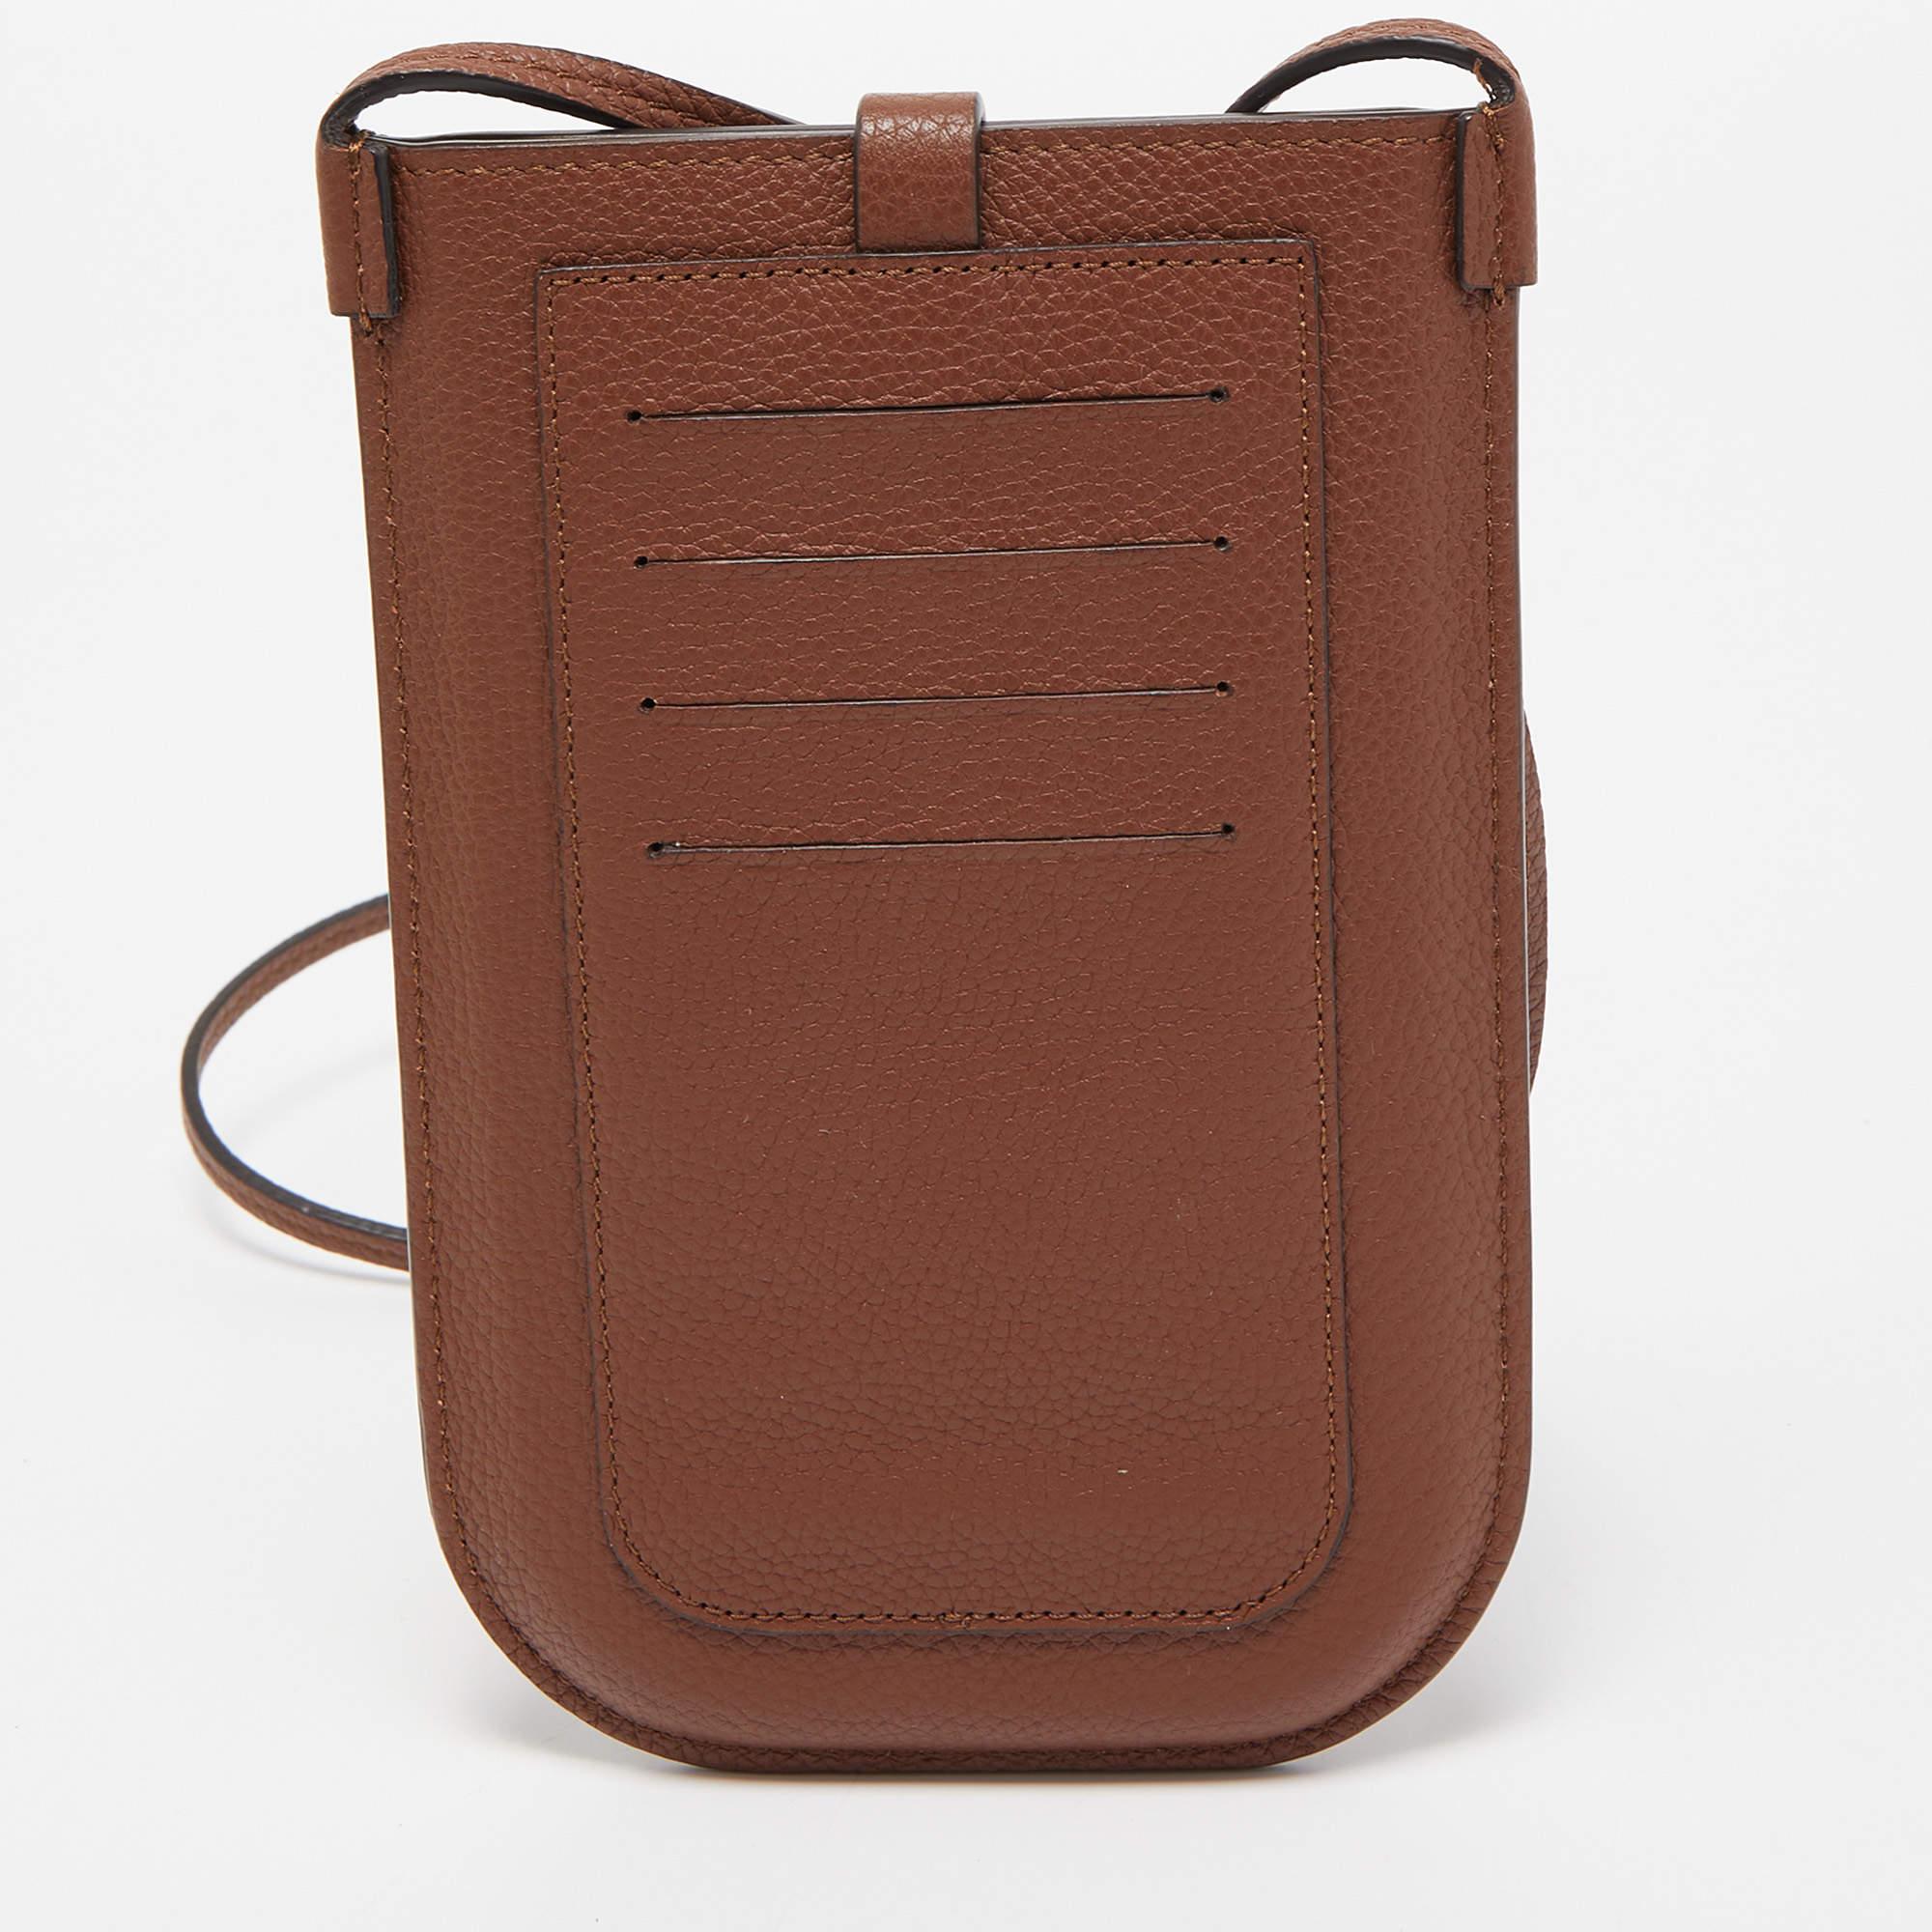 Burberry Brown Leather Anne Phone Pouch with Strap 4